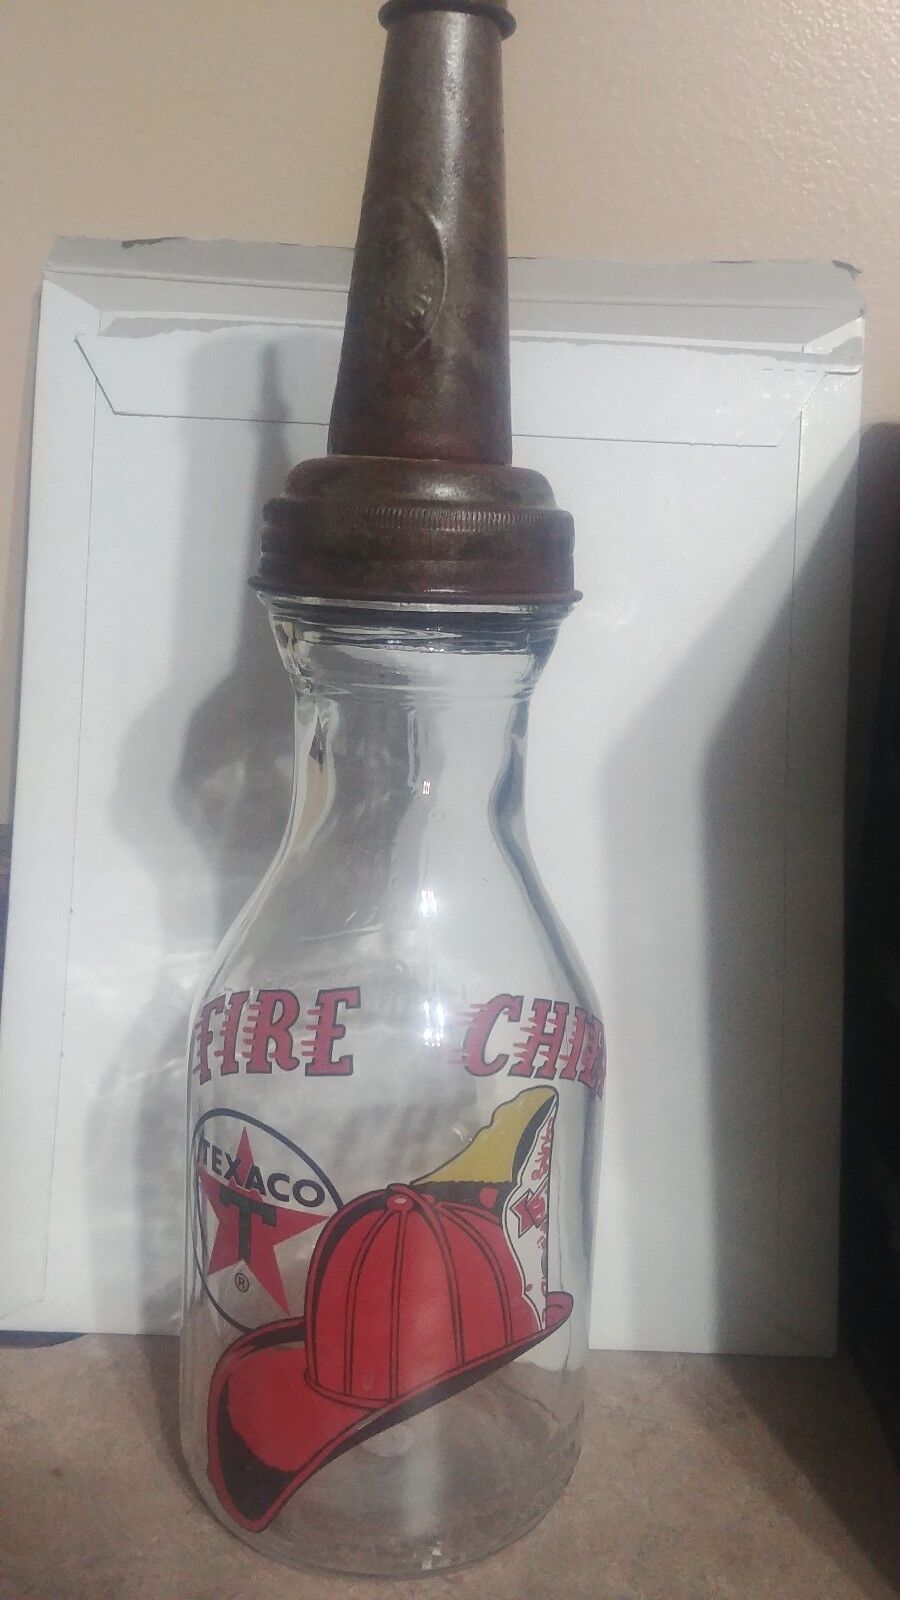 Texaco Fire Chief Gasoline Oil Bottle with Master Metal Spout One Quart Без бренда